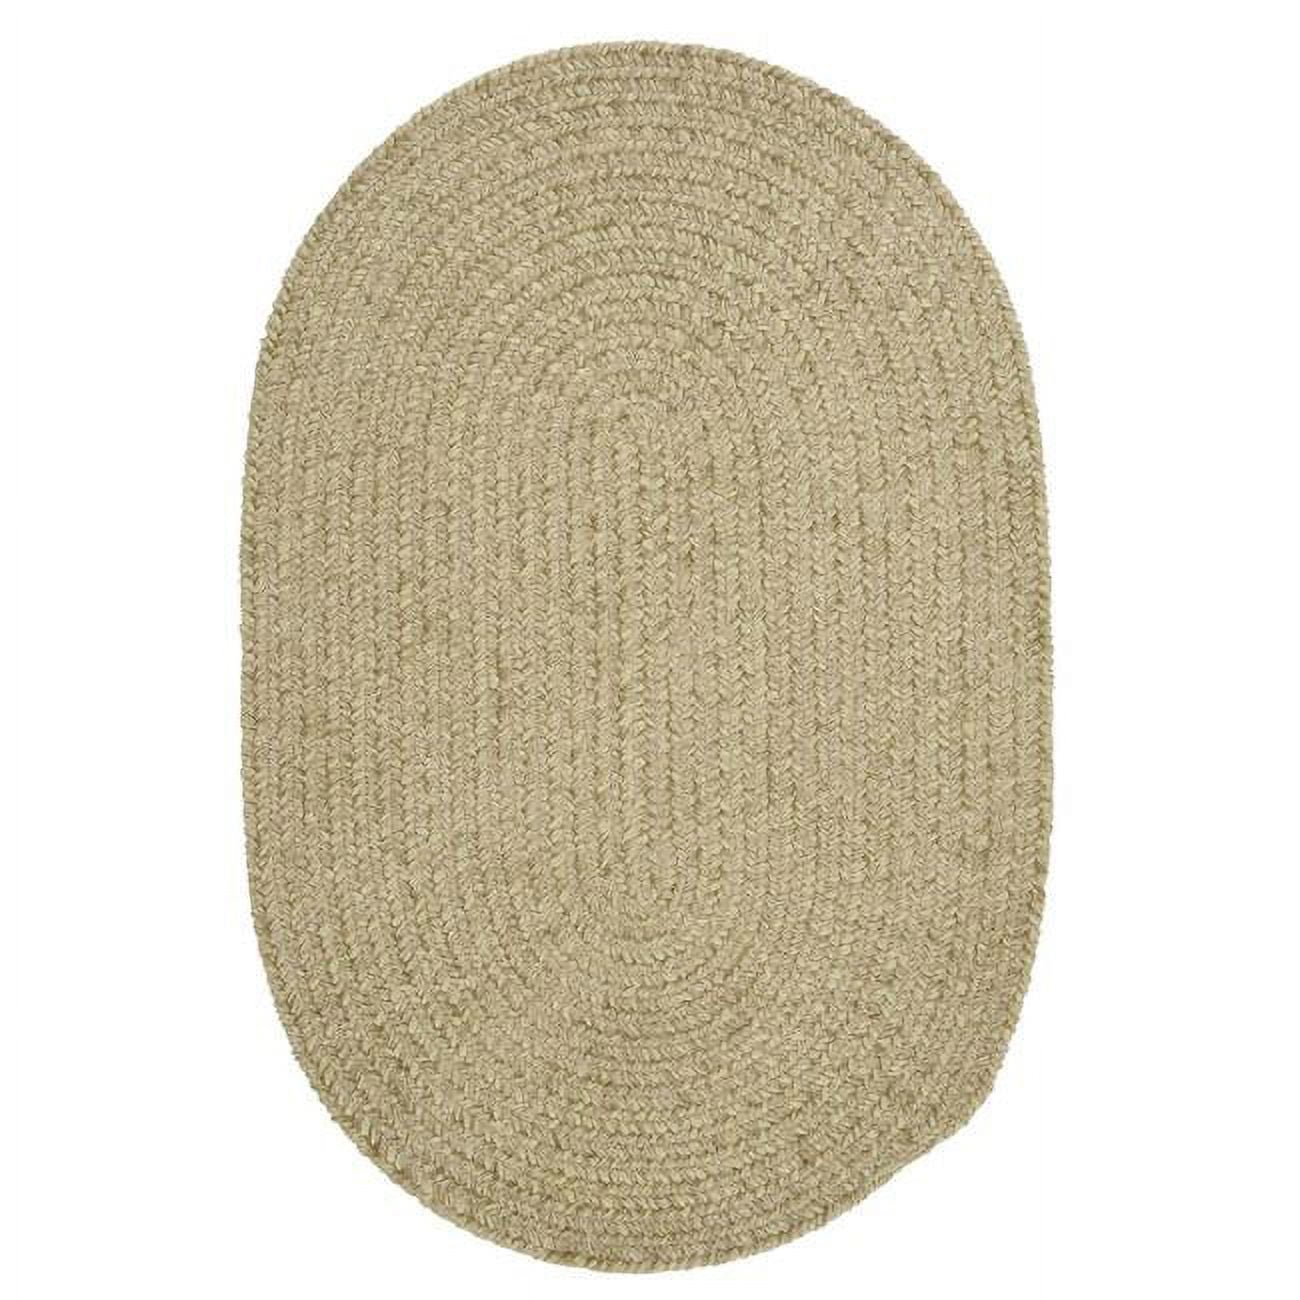 Colonial Mills Barefoot Chenille Bath Celery Rug, 1'5x2'3